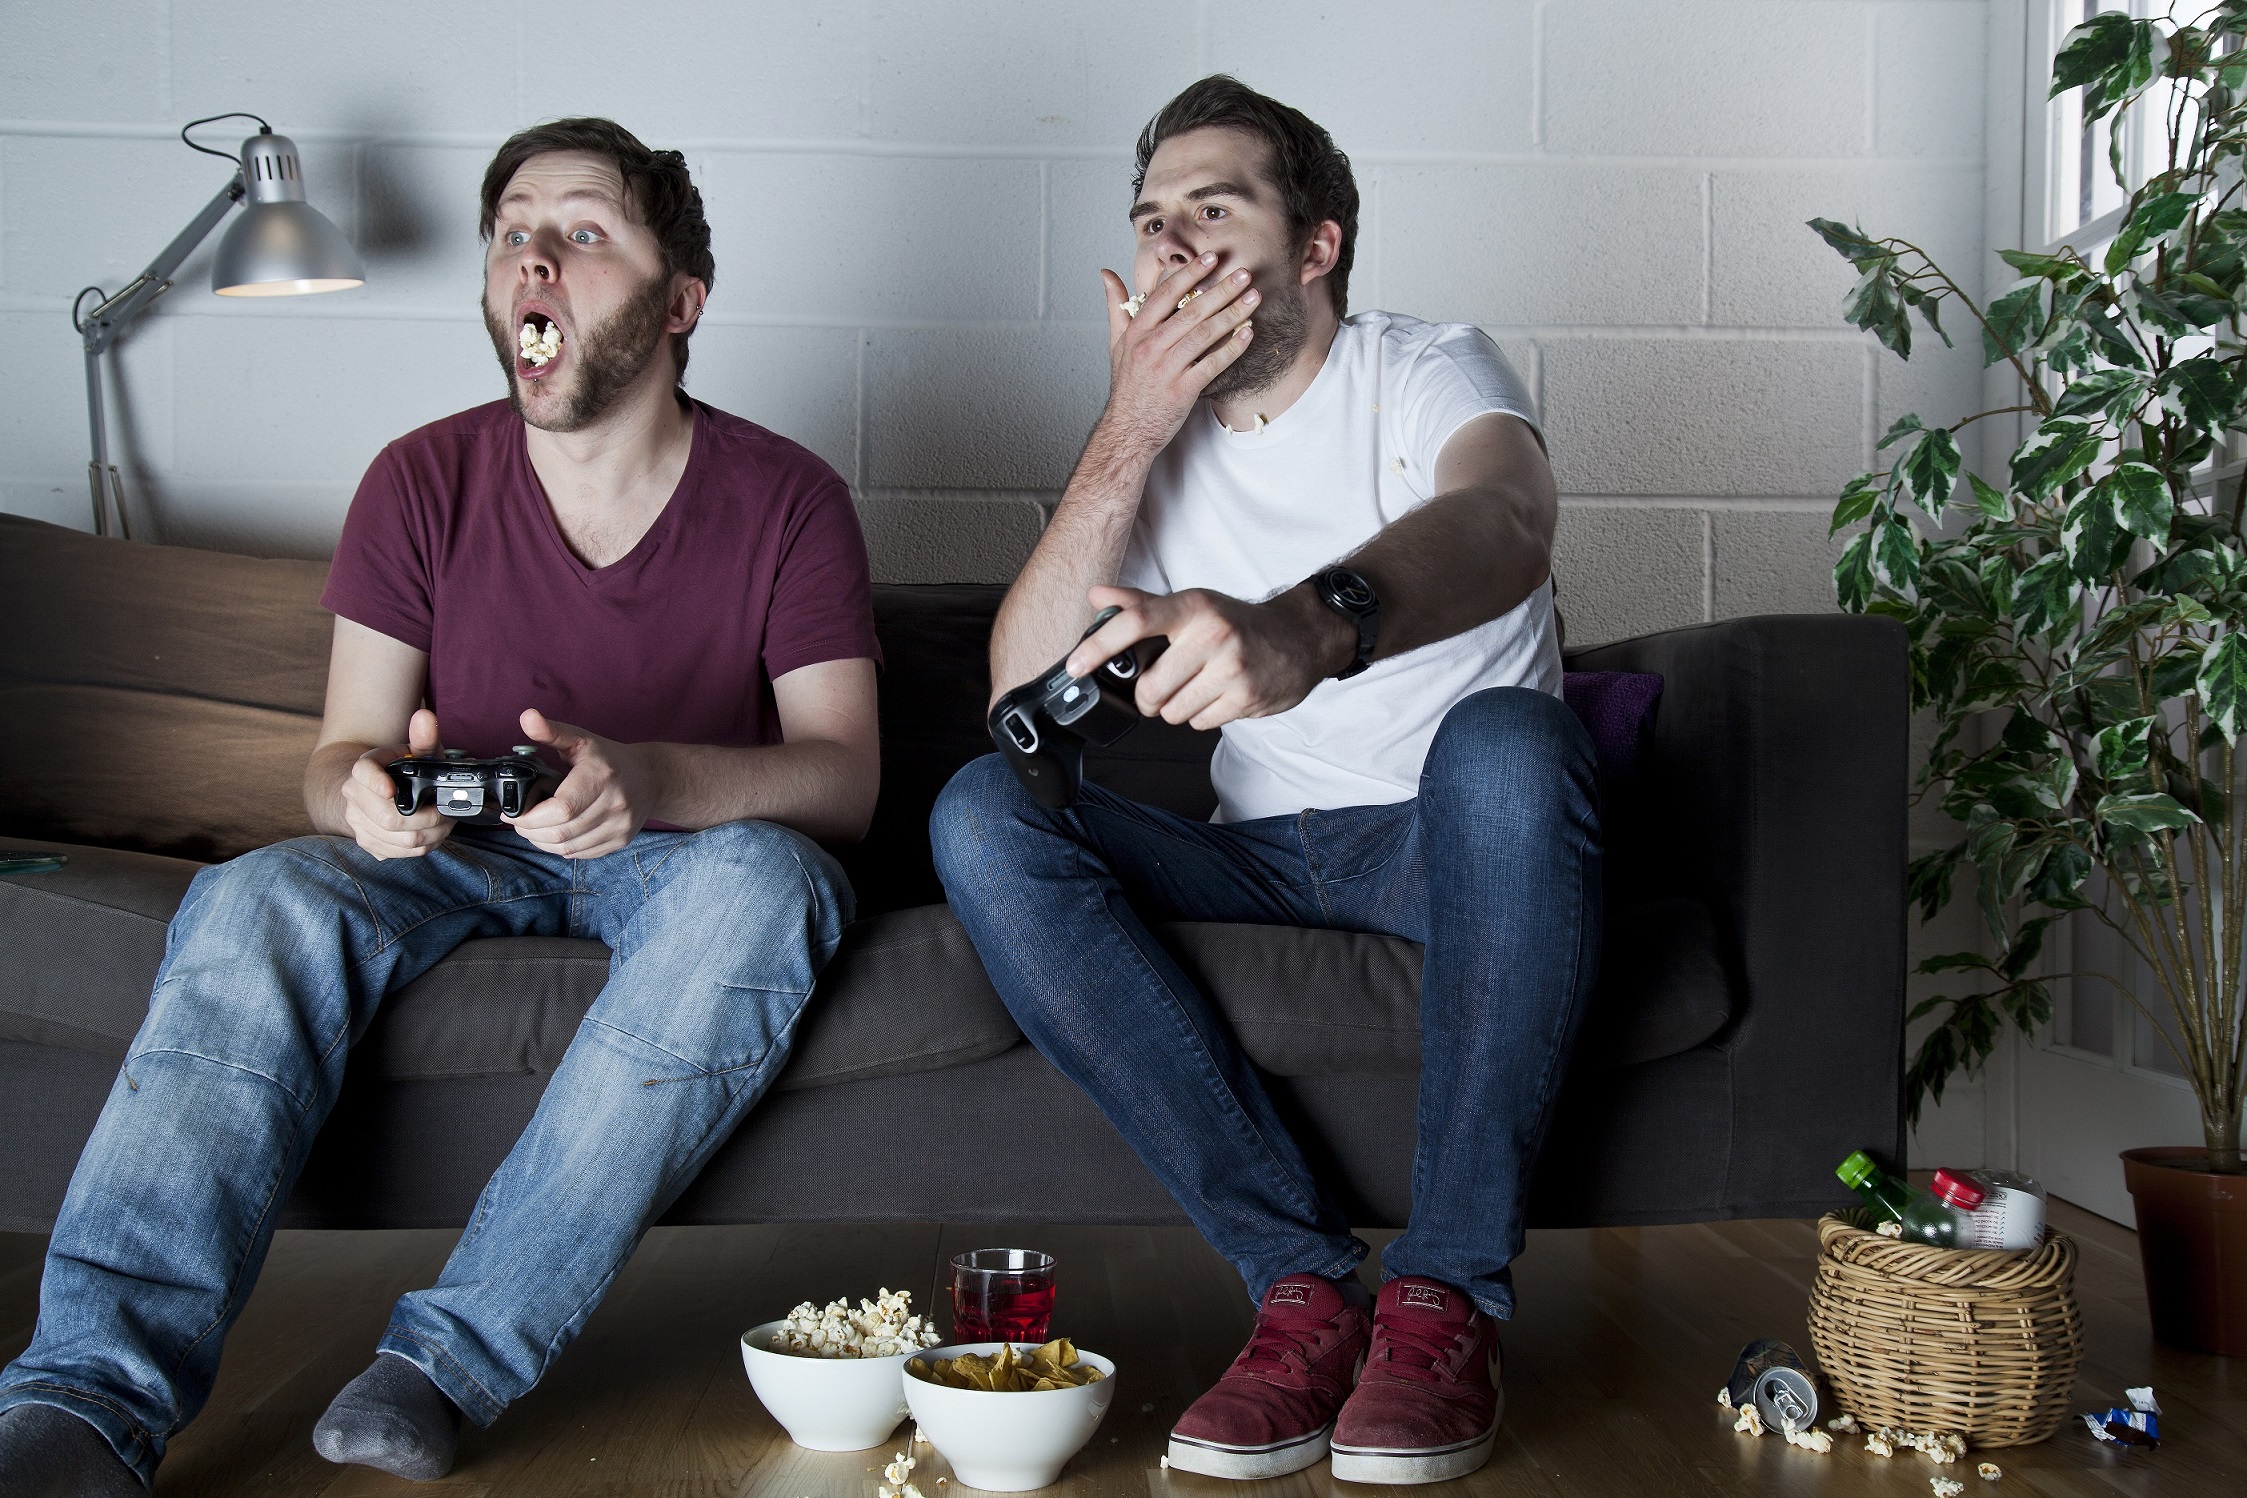 Two young men eating popcorn while playing Sony PlayStation 3 video games on a sofa, taken on July 9, 2013. (Photo by Philip Sowels/Future Publishing via Getty Images)